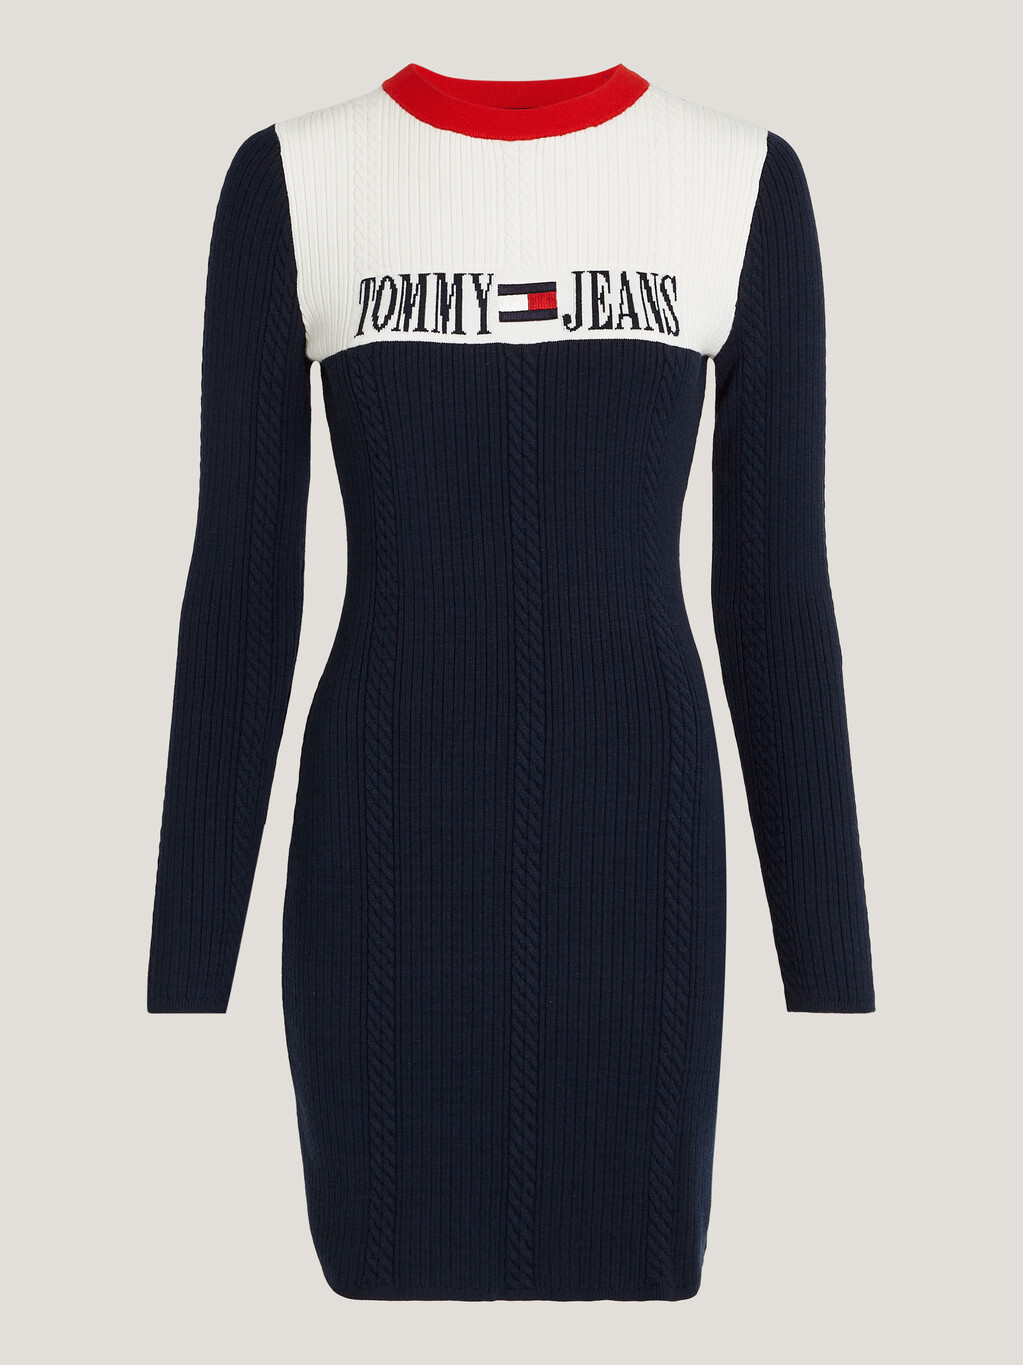 Archive Colour-Blocked Cable Knit Sweater Dress, Dark Night Navy / Multi, hi-res